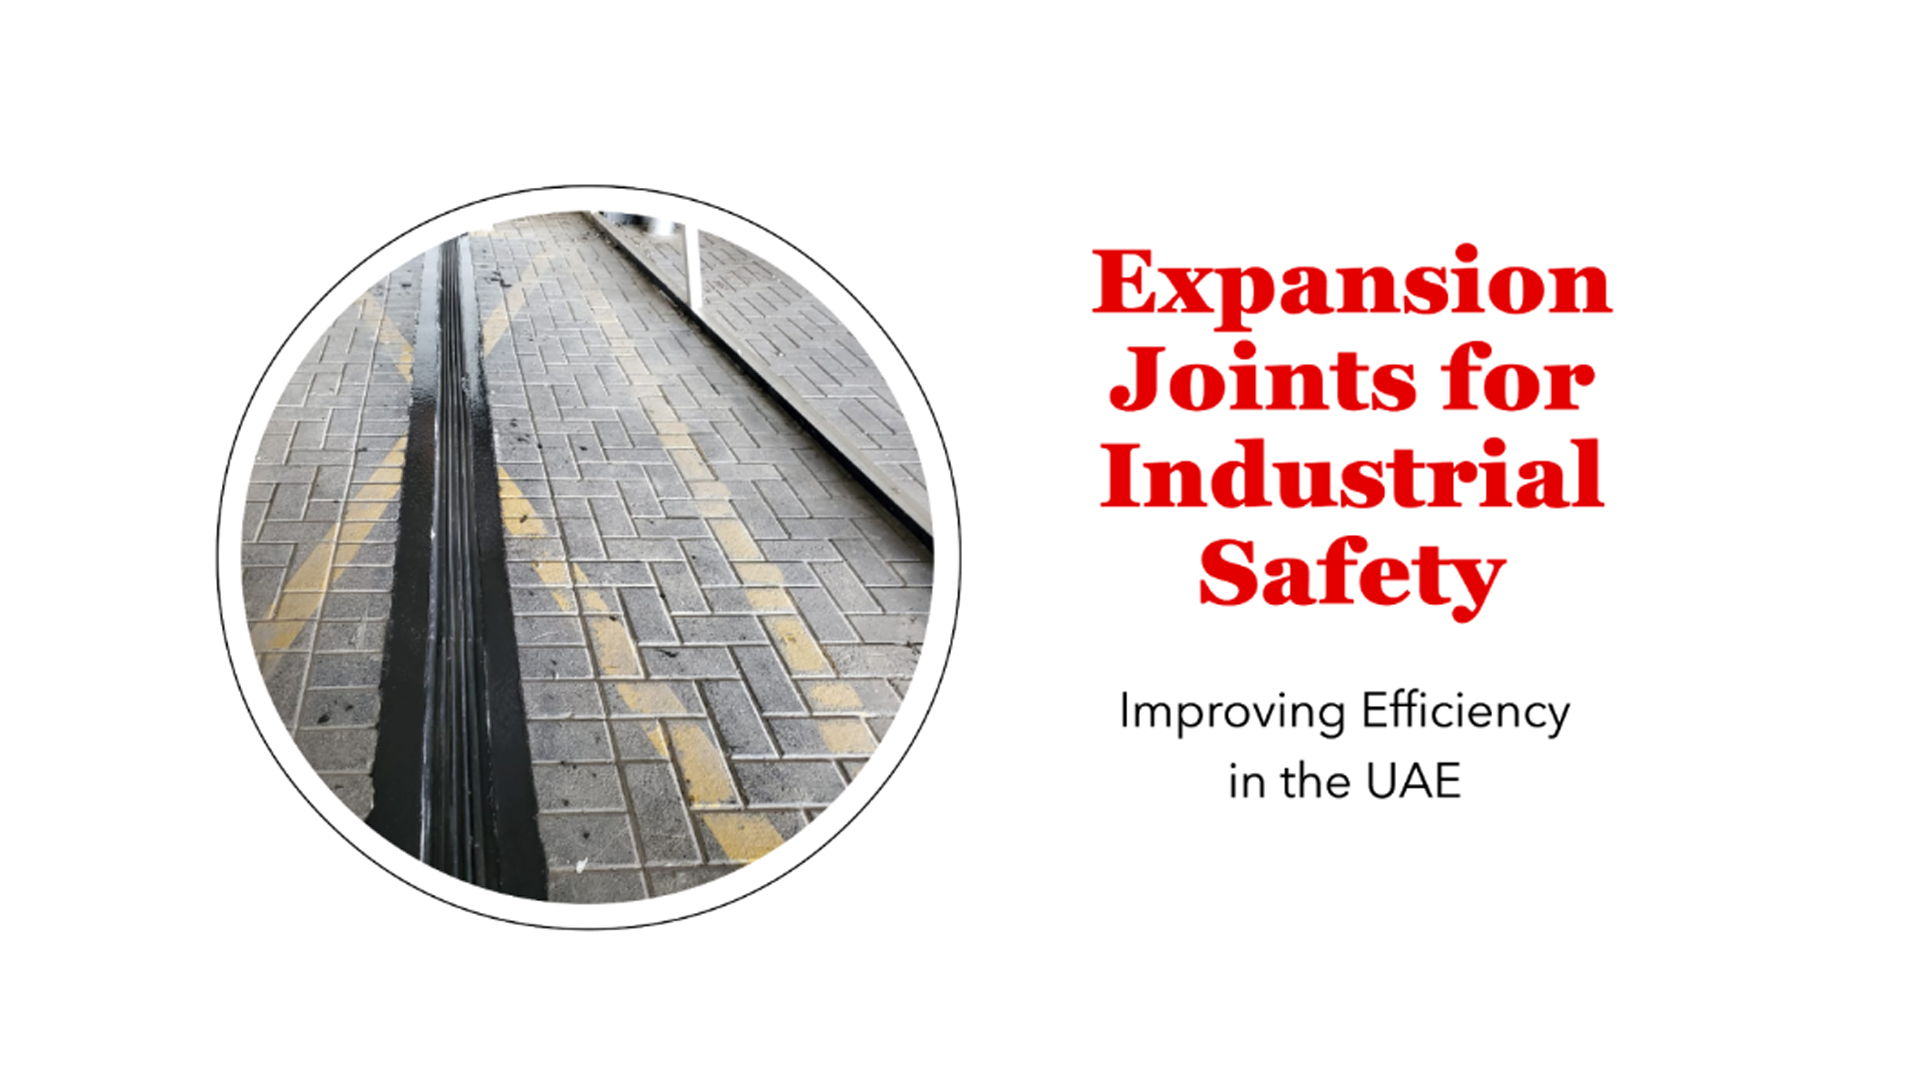 How Expansion Joints Improve Industrial Safety and Efficiency in the UAE